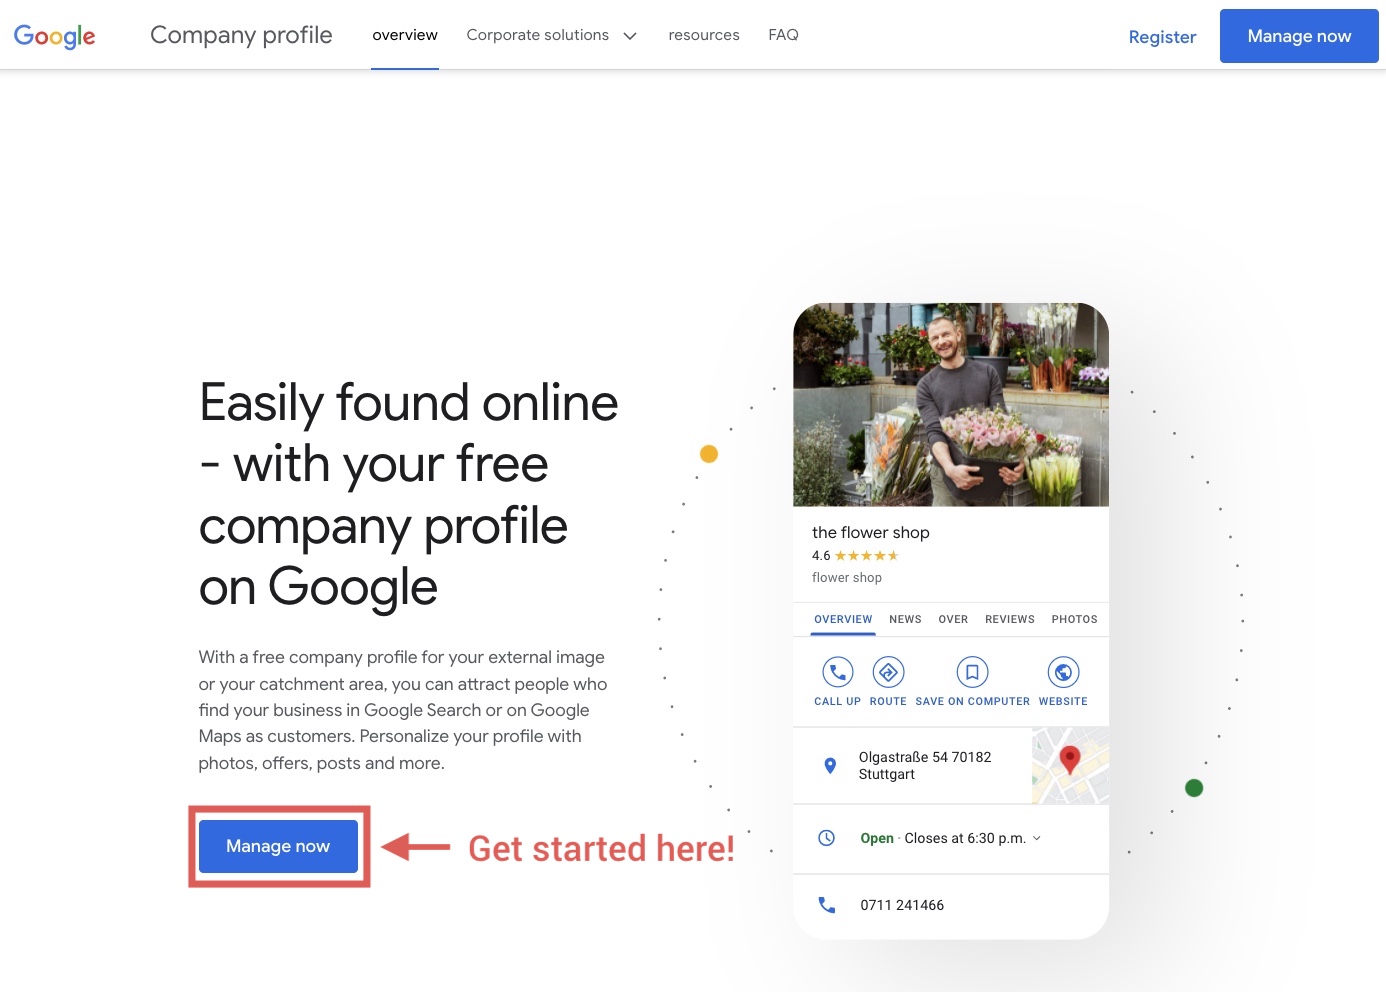 You can see a screenshot of the Google My Business homepage. You can easily get to it via Google Search. Here you will find the button "Get started now" in the top right corner of the page as well as relatively centrally placed. In the image, the button in the middle of the page is indicated by an arrow.